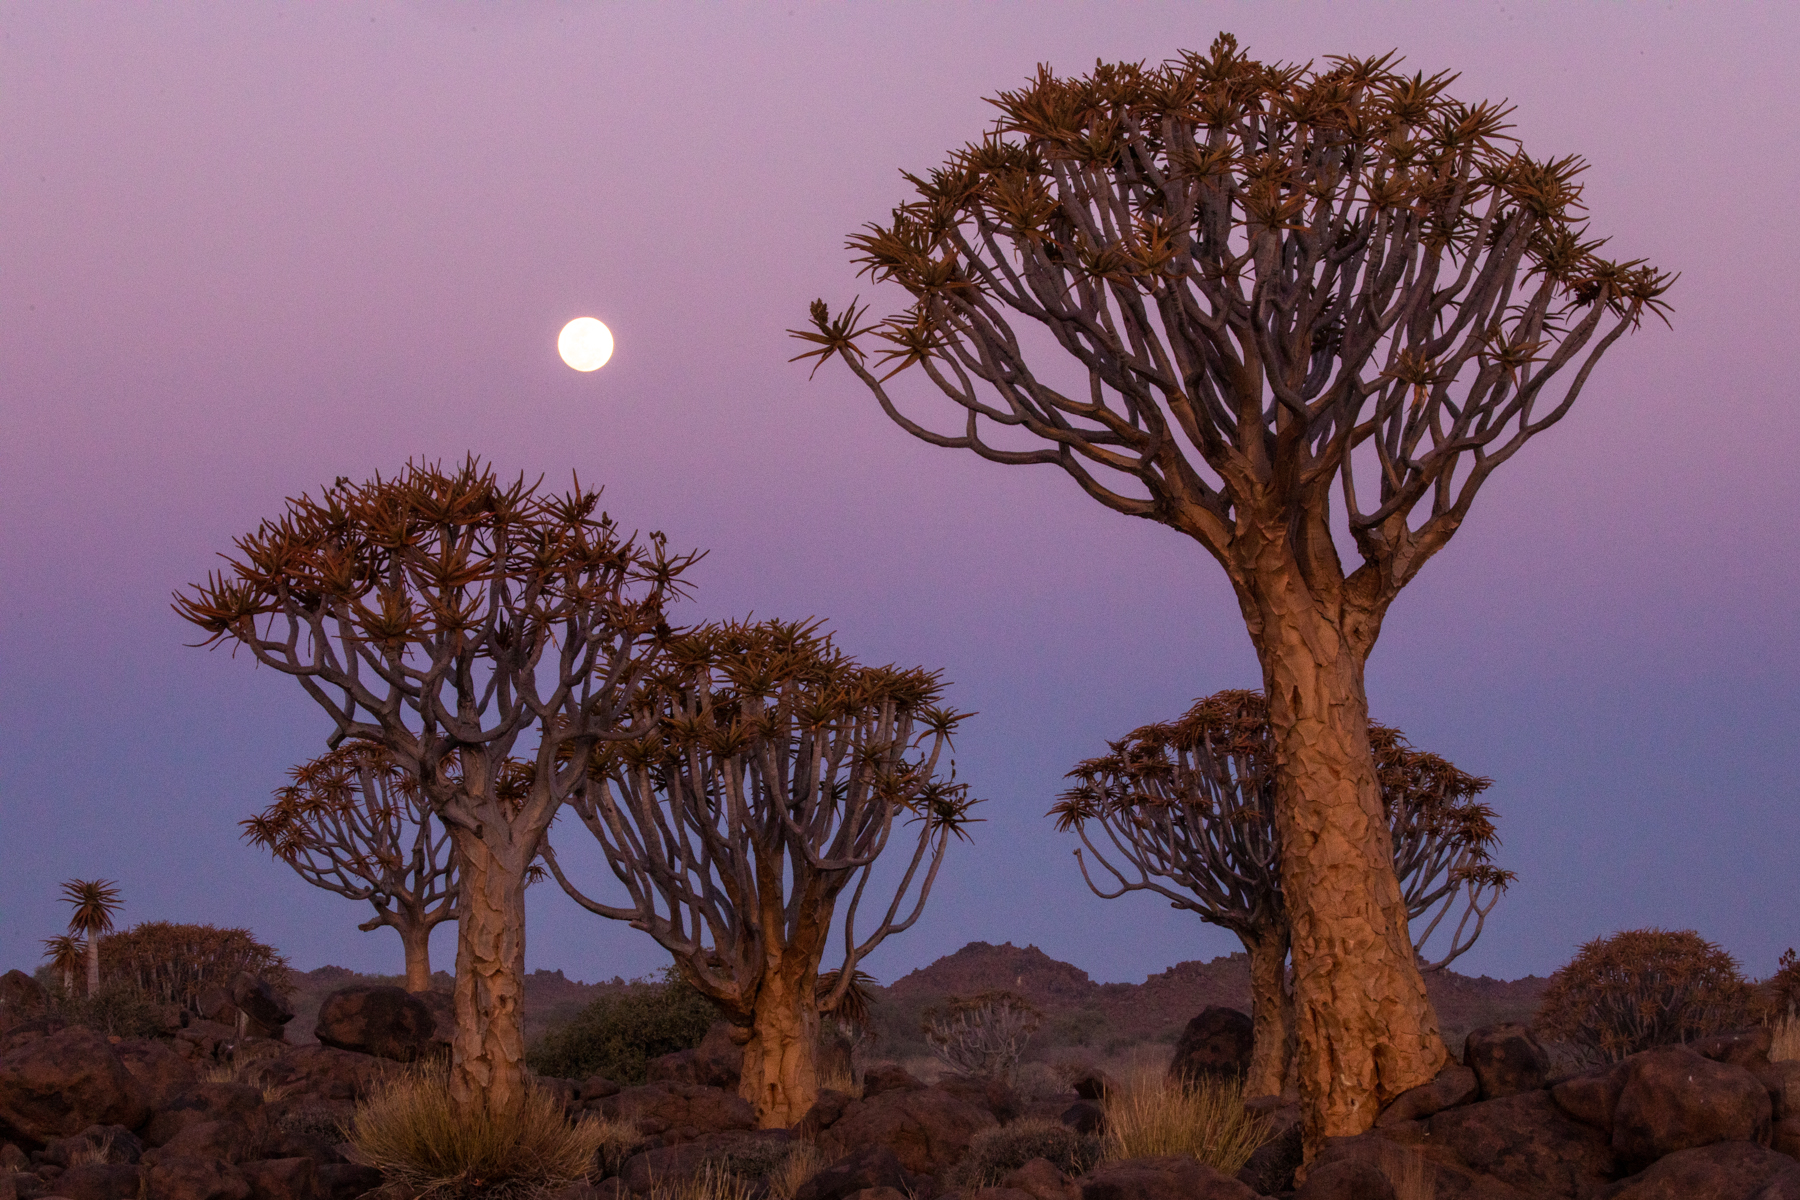 The setting moon at the Quiver Tree Forest in Keetmanshoop during our wildlife photography tour of Namibia